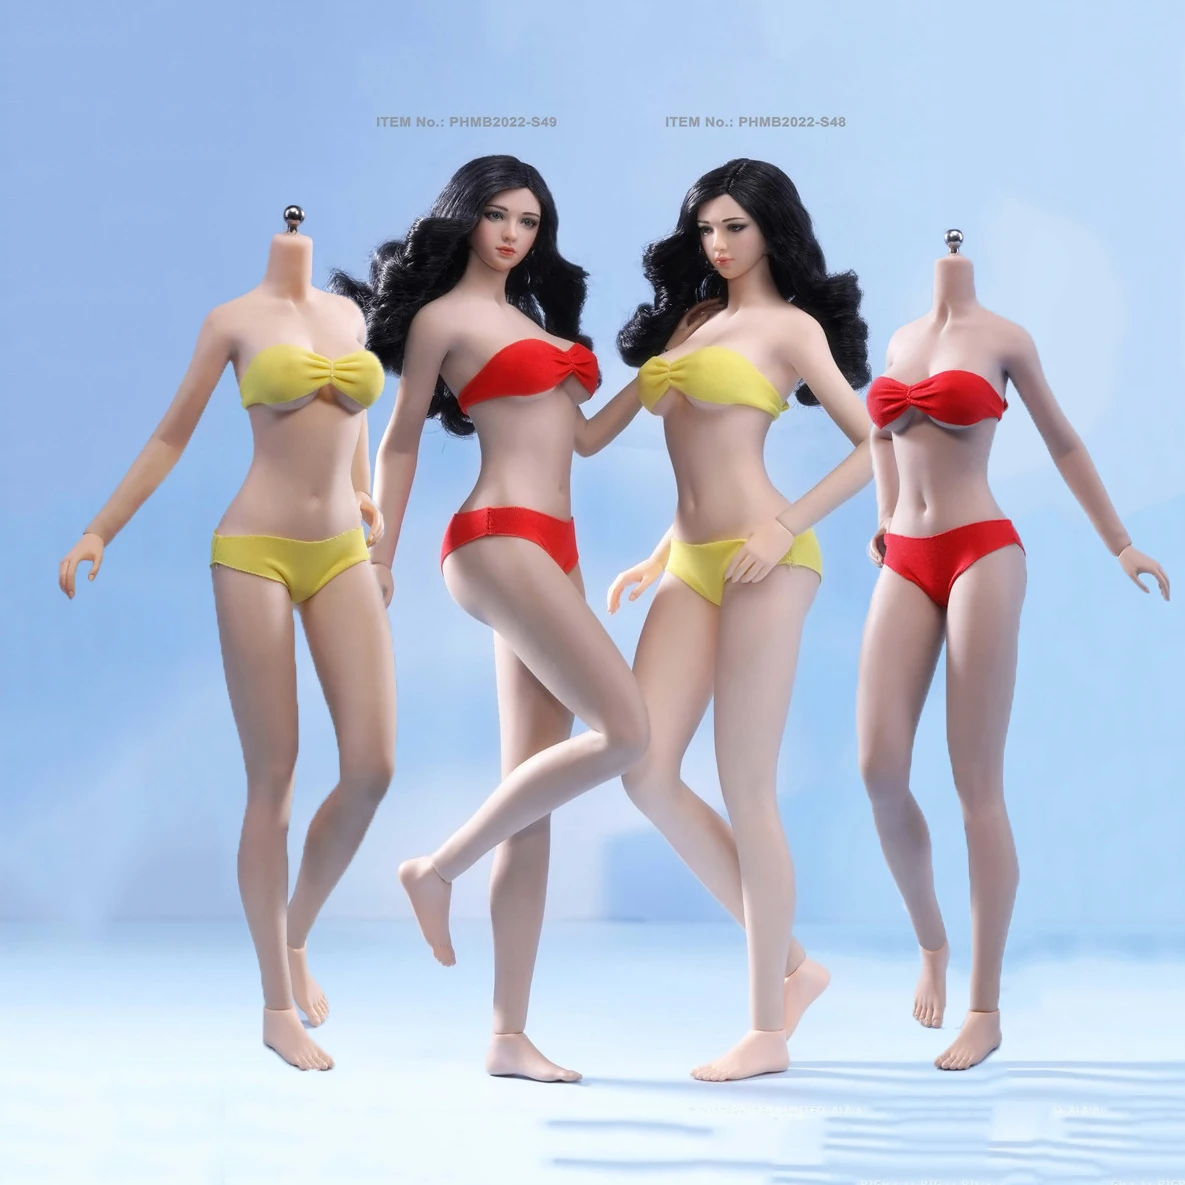 

Tbleague PHMB2022-S48 S49 1/6 Steel Seamless Female Body with Detachable Feet Hand Pale/Suntan Action Figure Doll Toy